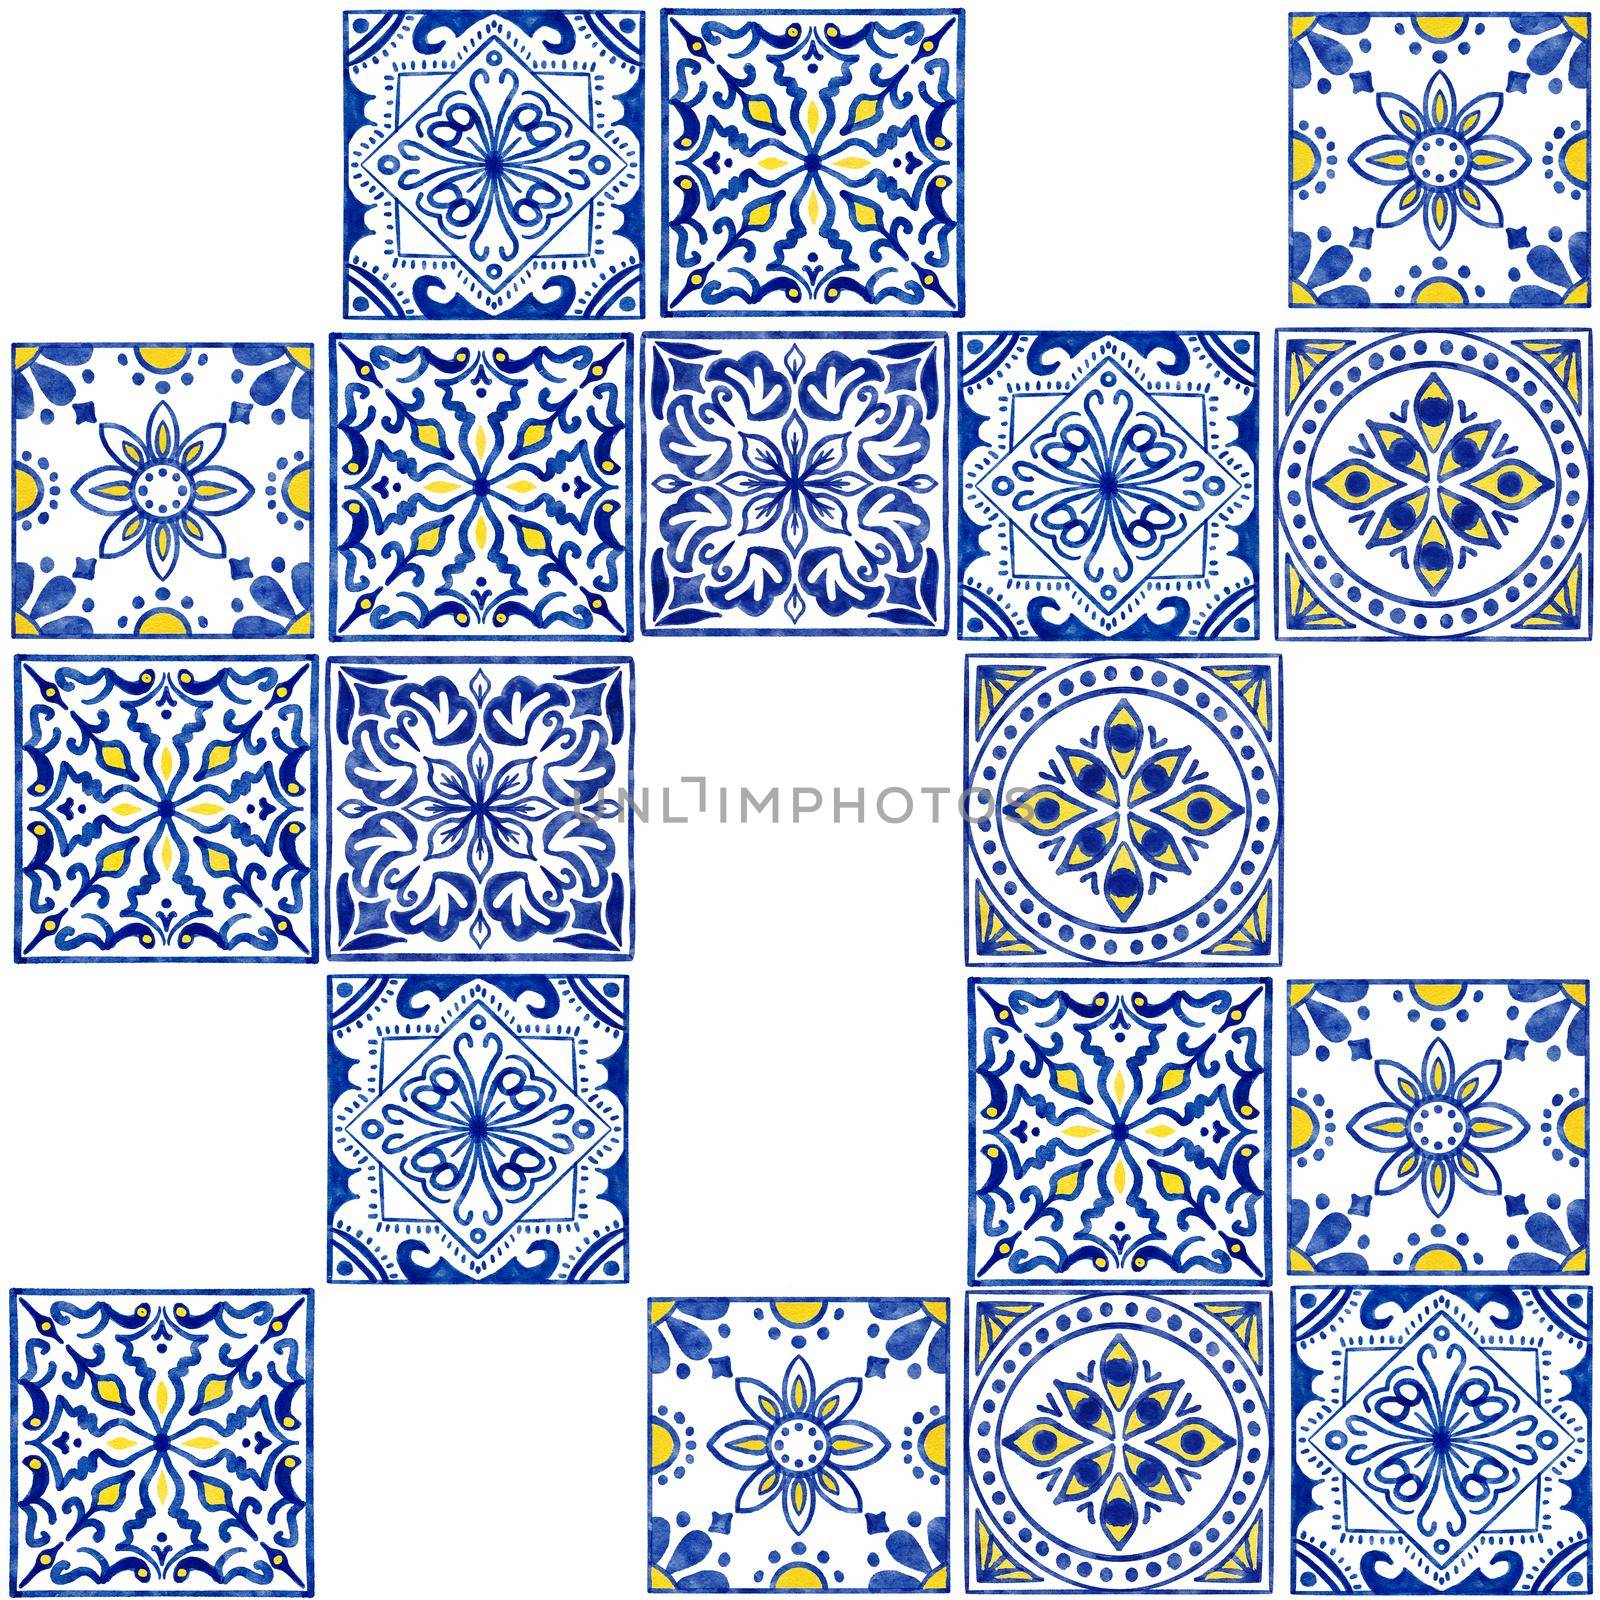 Hand drawn watercolor seamless pattern with blue white azulejo Portuguese ceramic traditional tiles. Ethnic portugal geomentric indigo repeated wall floor ornament. Arabic ornamental background. by Lagmar